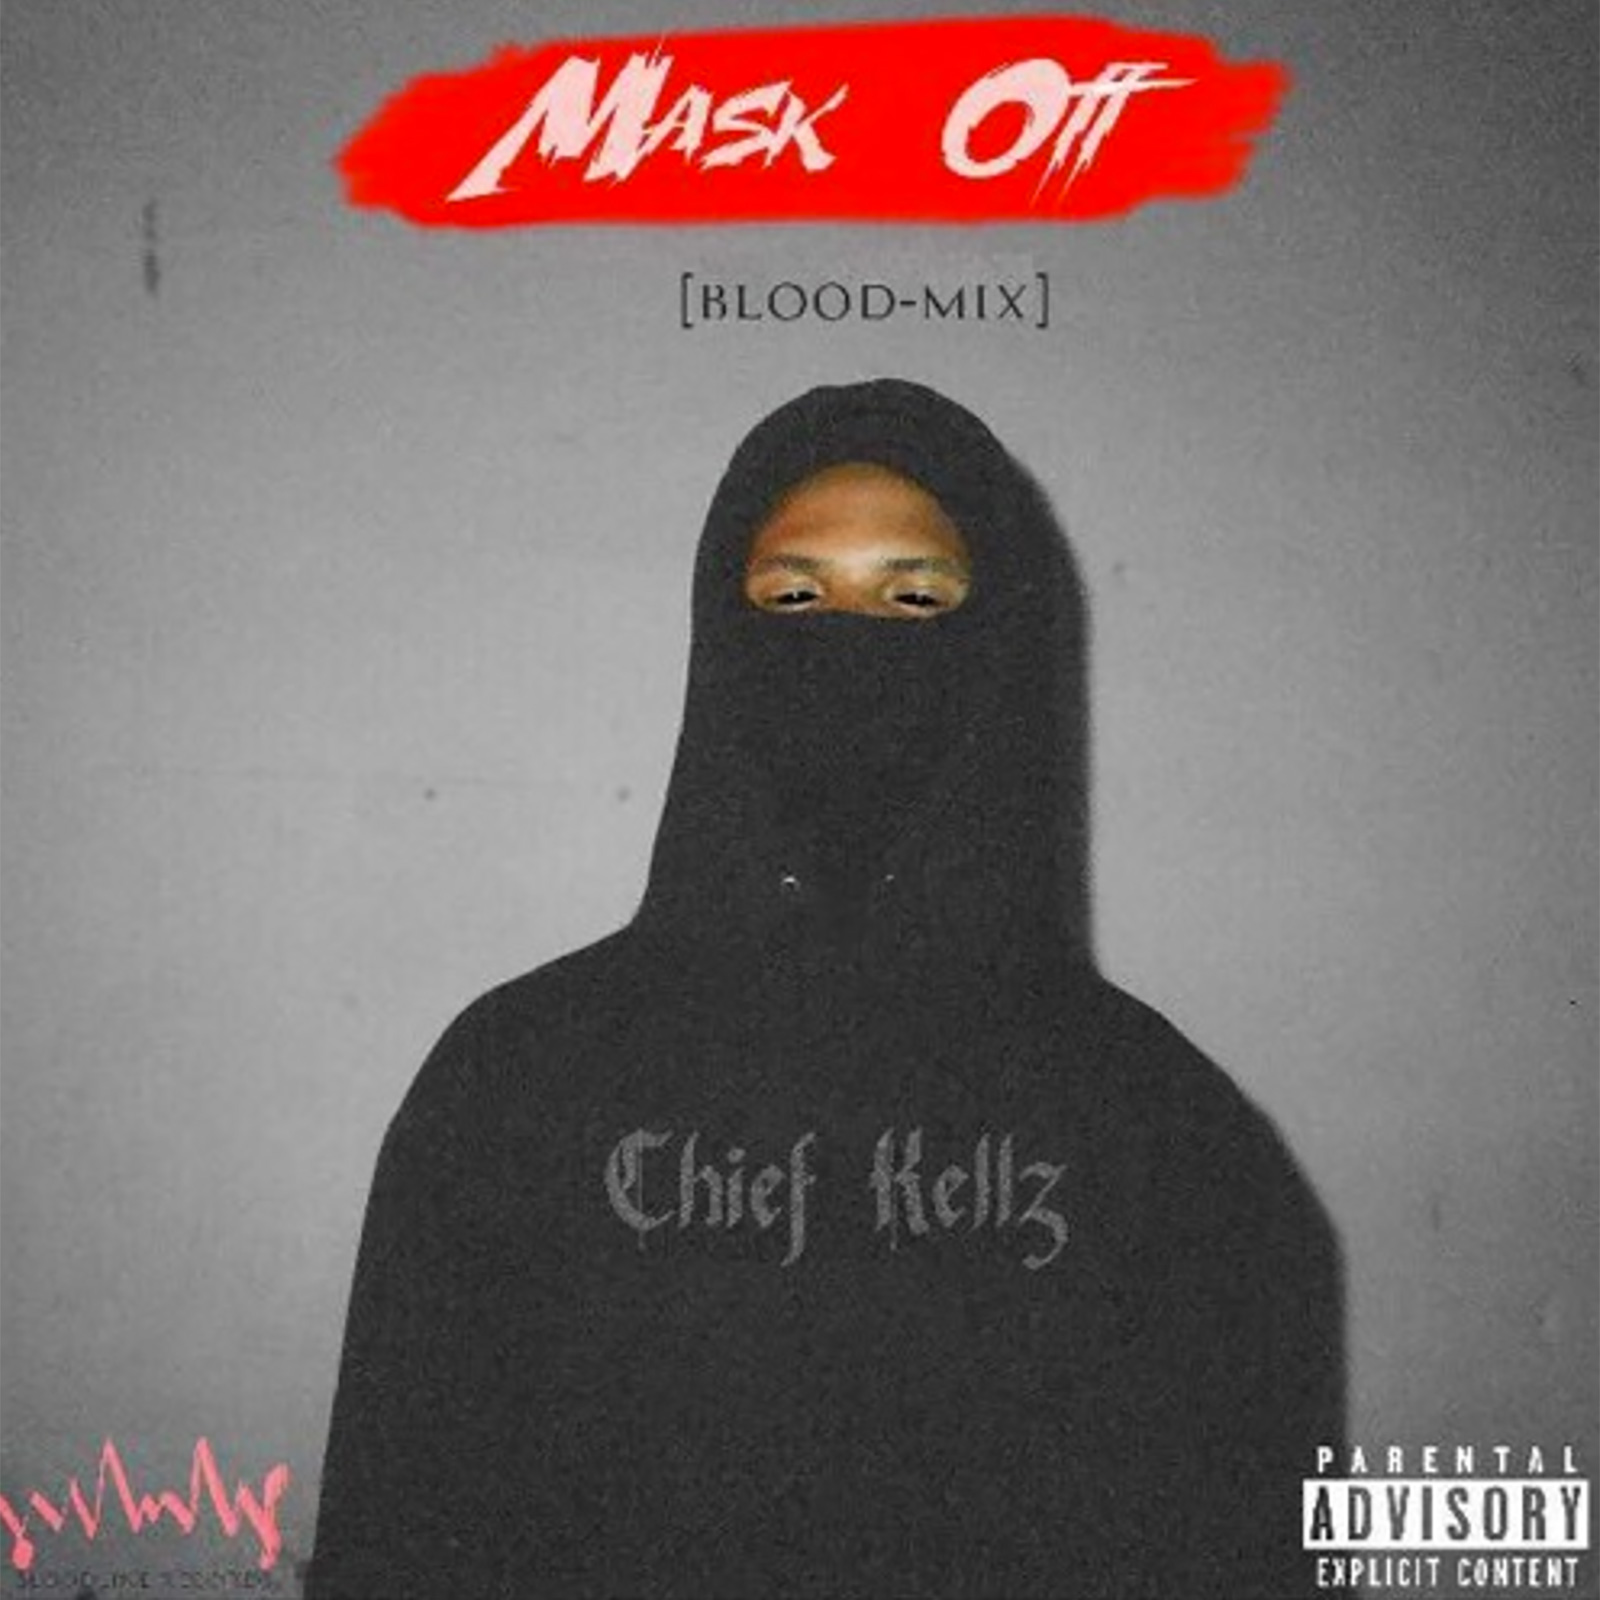 Mask Off by Chief Kellz